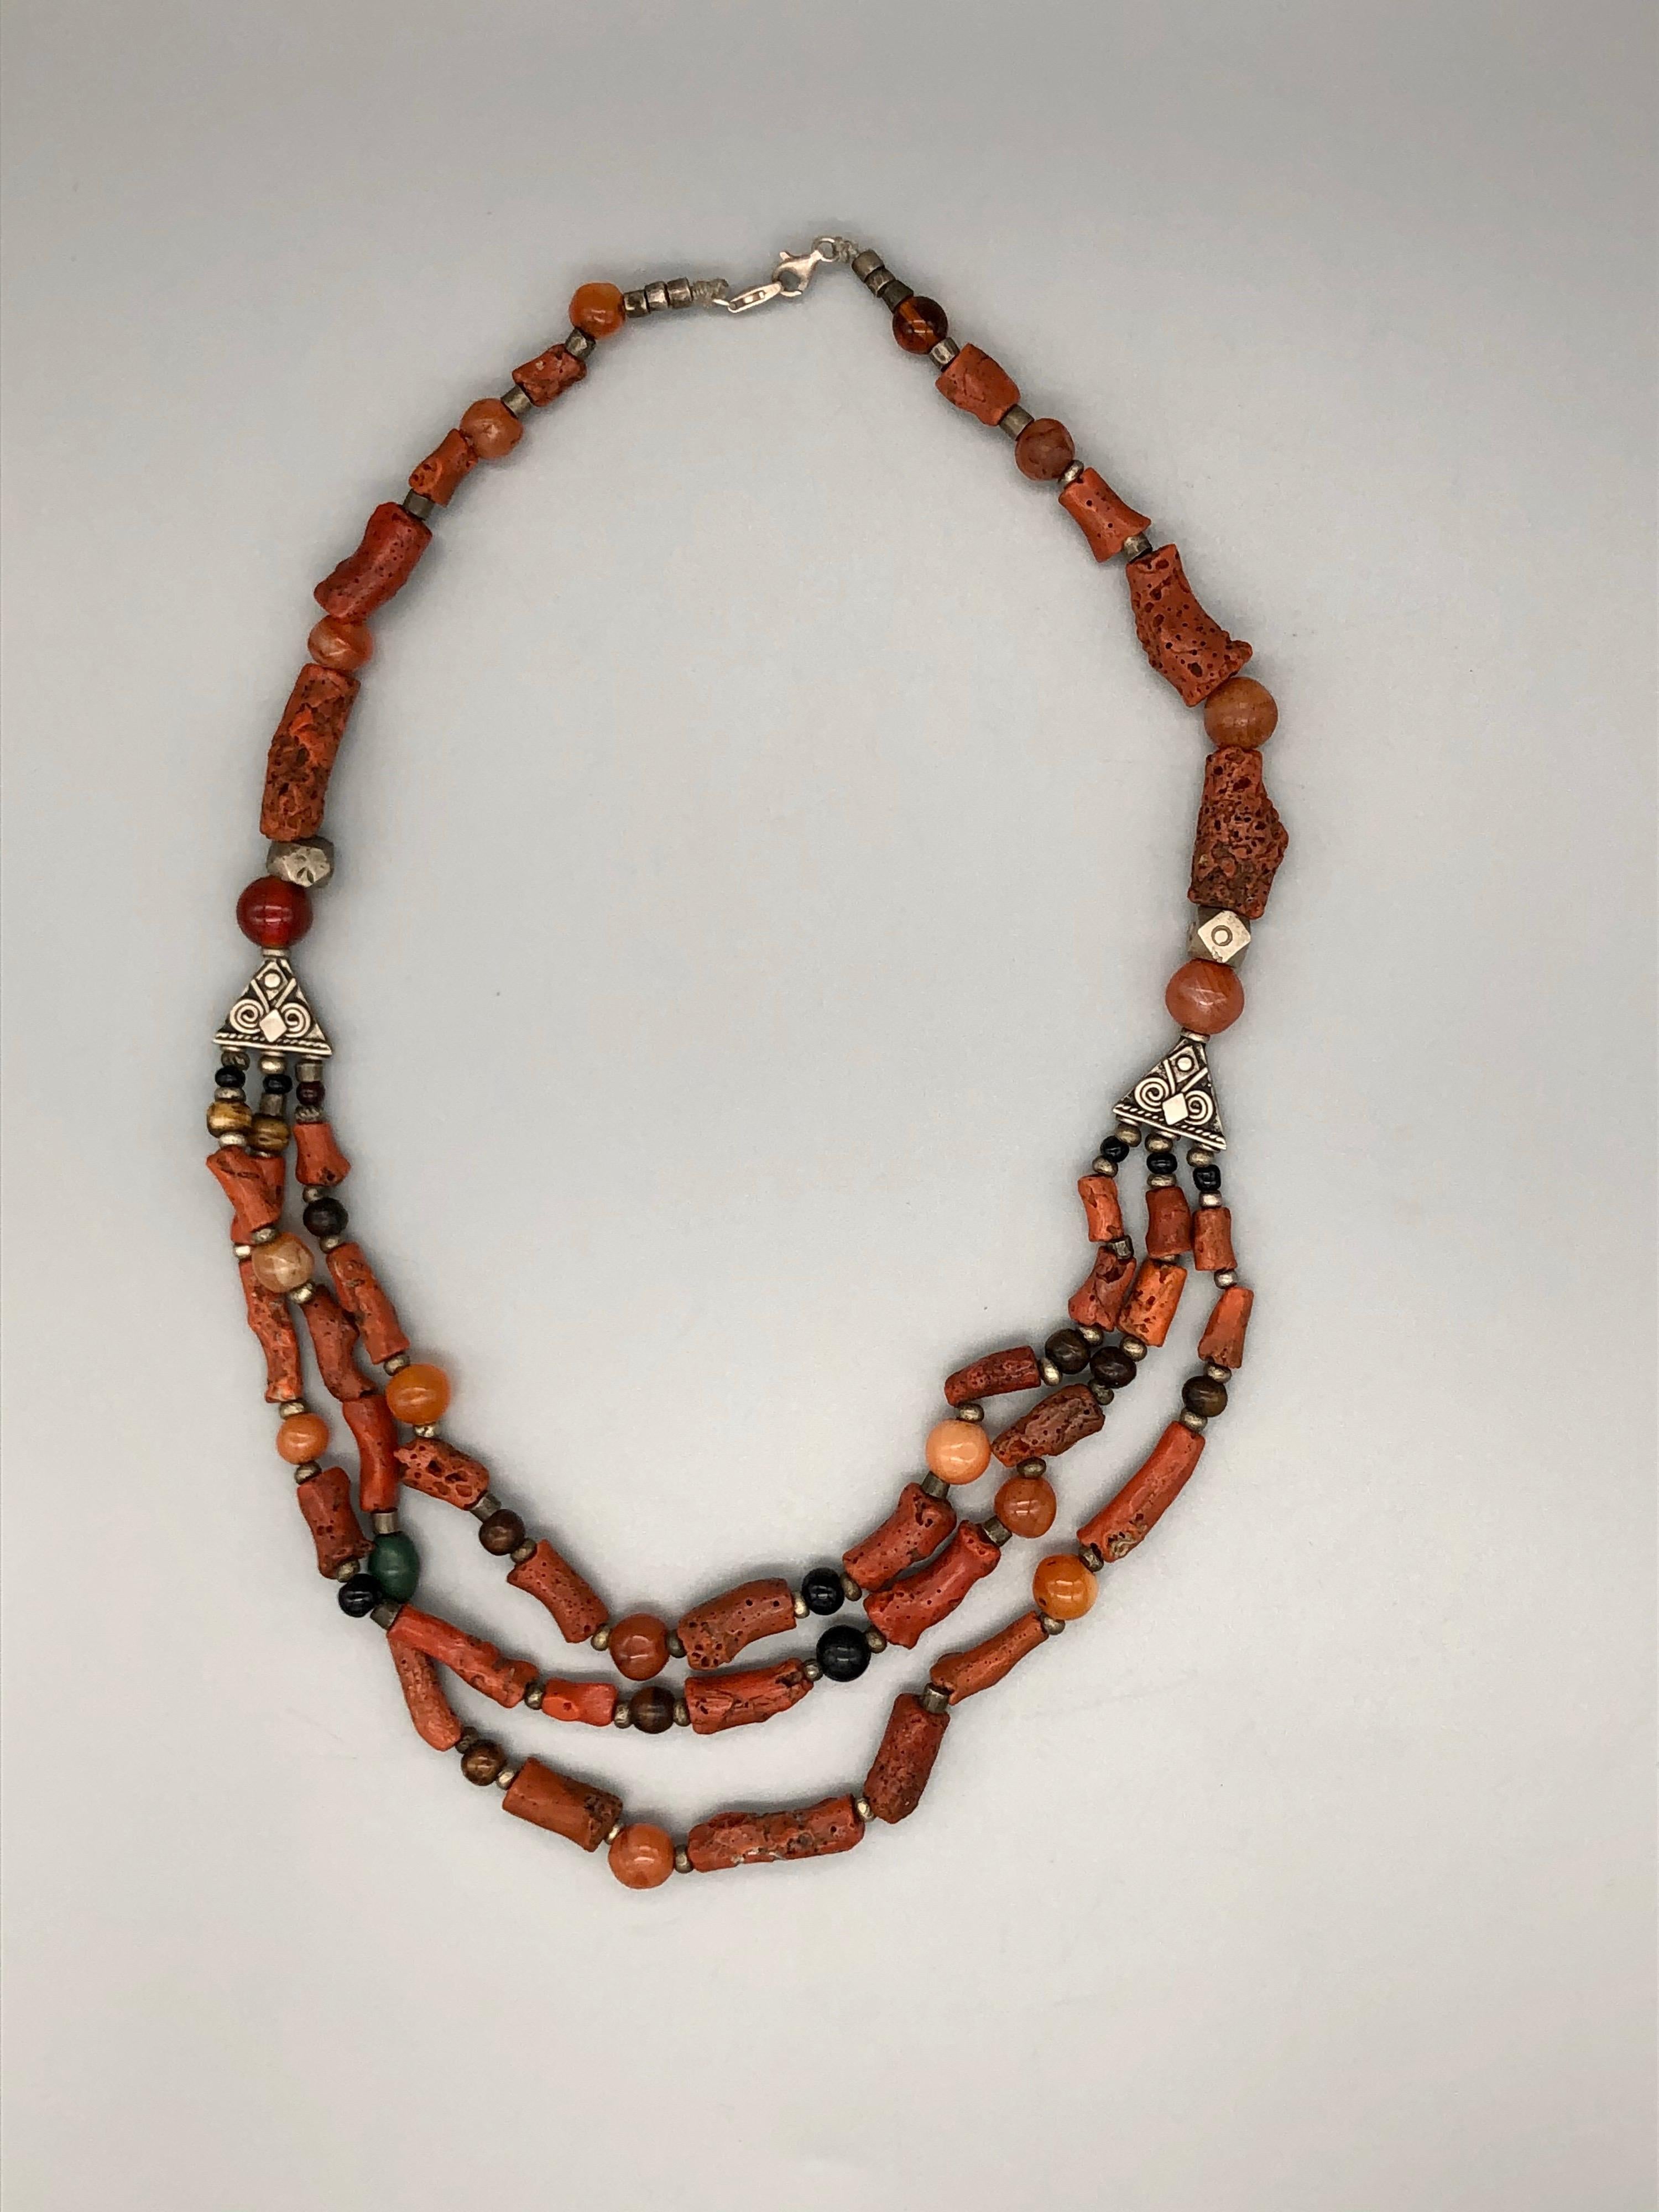 This vintage coral necklace is a wonderful find. Large pieces of true red branch coral are interspersed with agate stones and etched and stamped silver beads. Other beads include tiger's eye, onyx, and glass. Three strands meet on sides in a